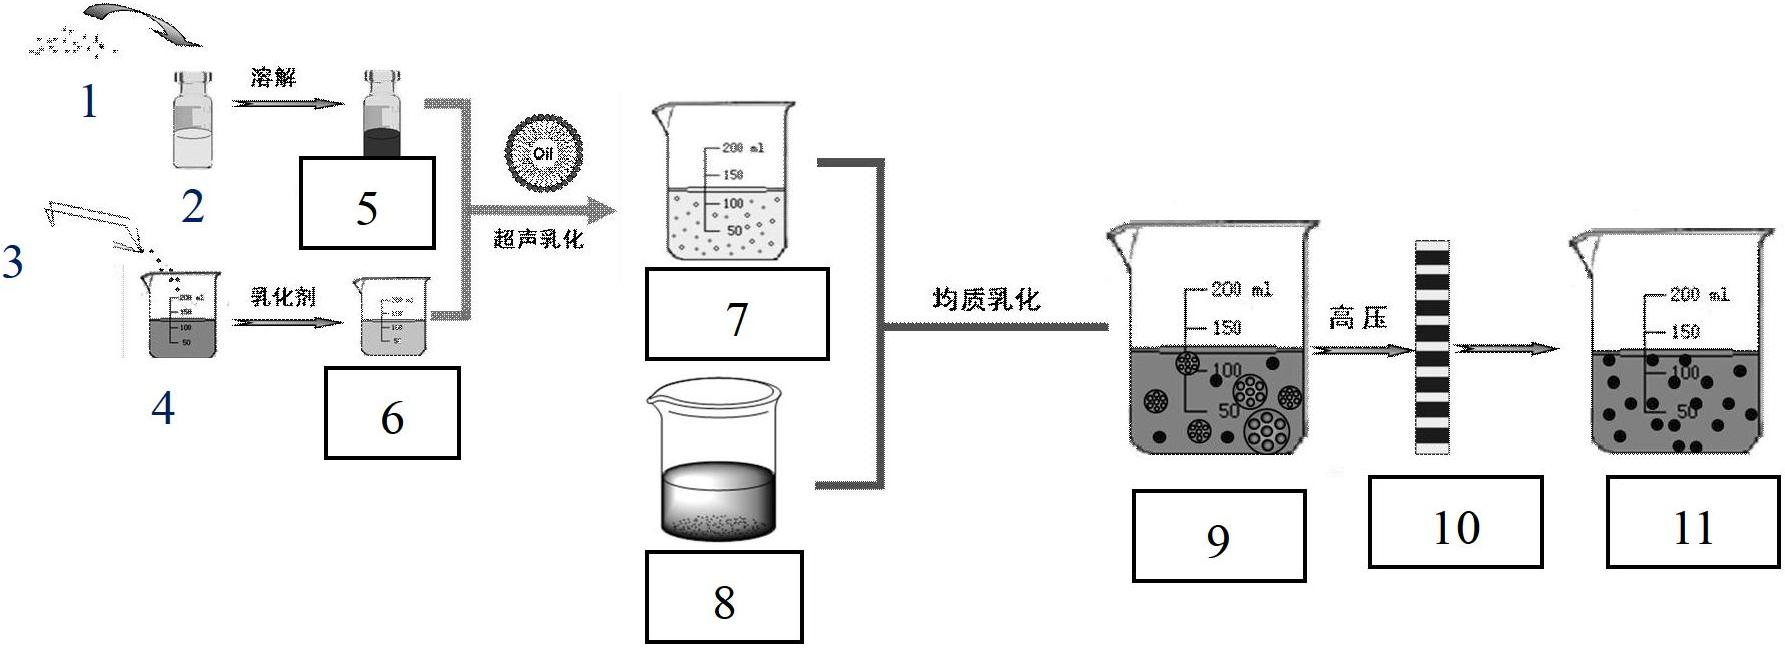 Chitosan-chitosan derivative nanosphere for loading indissoluble medicament, preparation method of nanosphere, and application of nanosphere serving as oral prepration